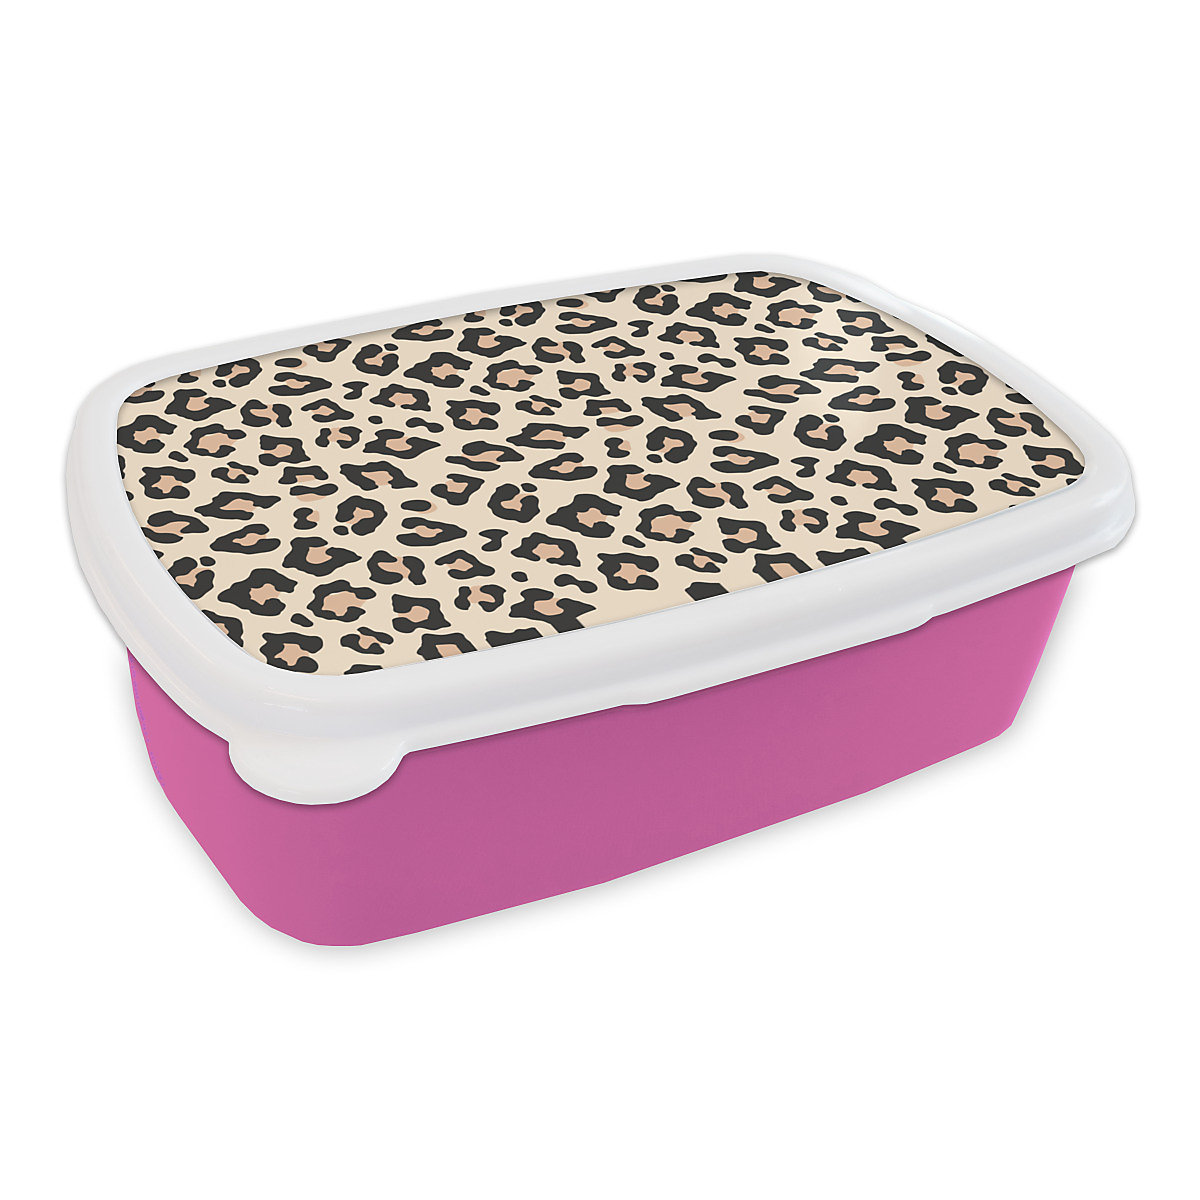 MuchoWow Lunchbox Brotdose Muster Panther Rosa weiß Tiere